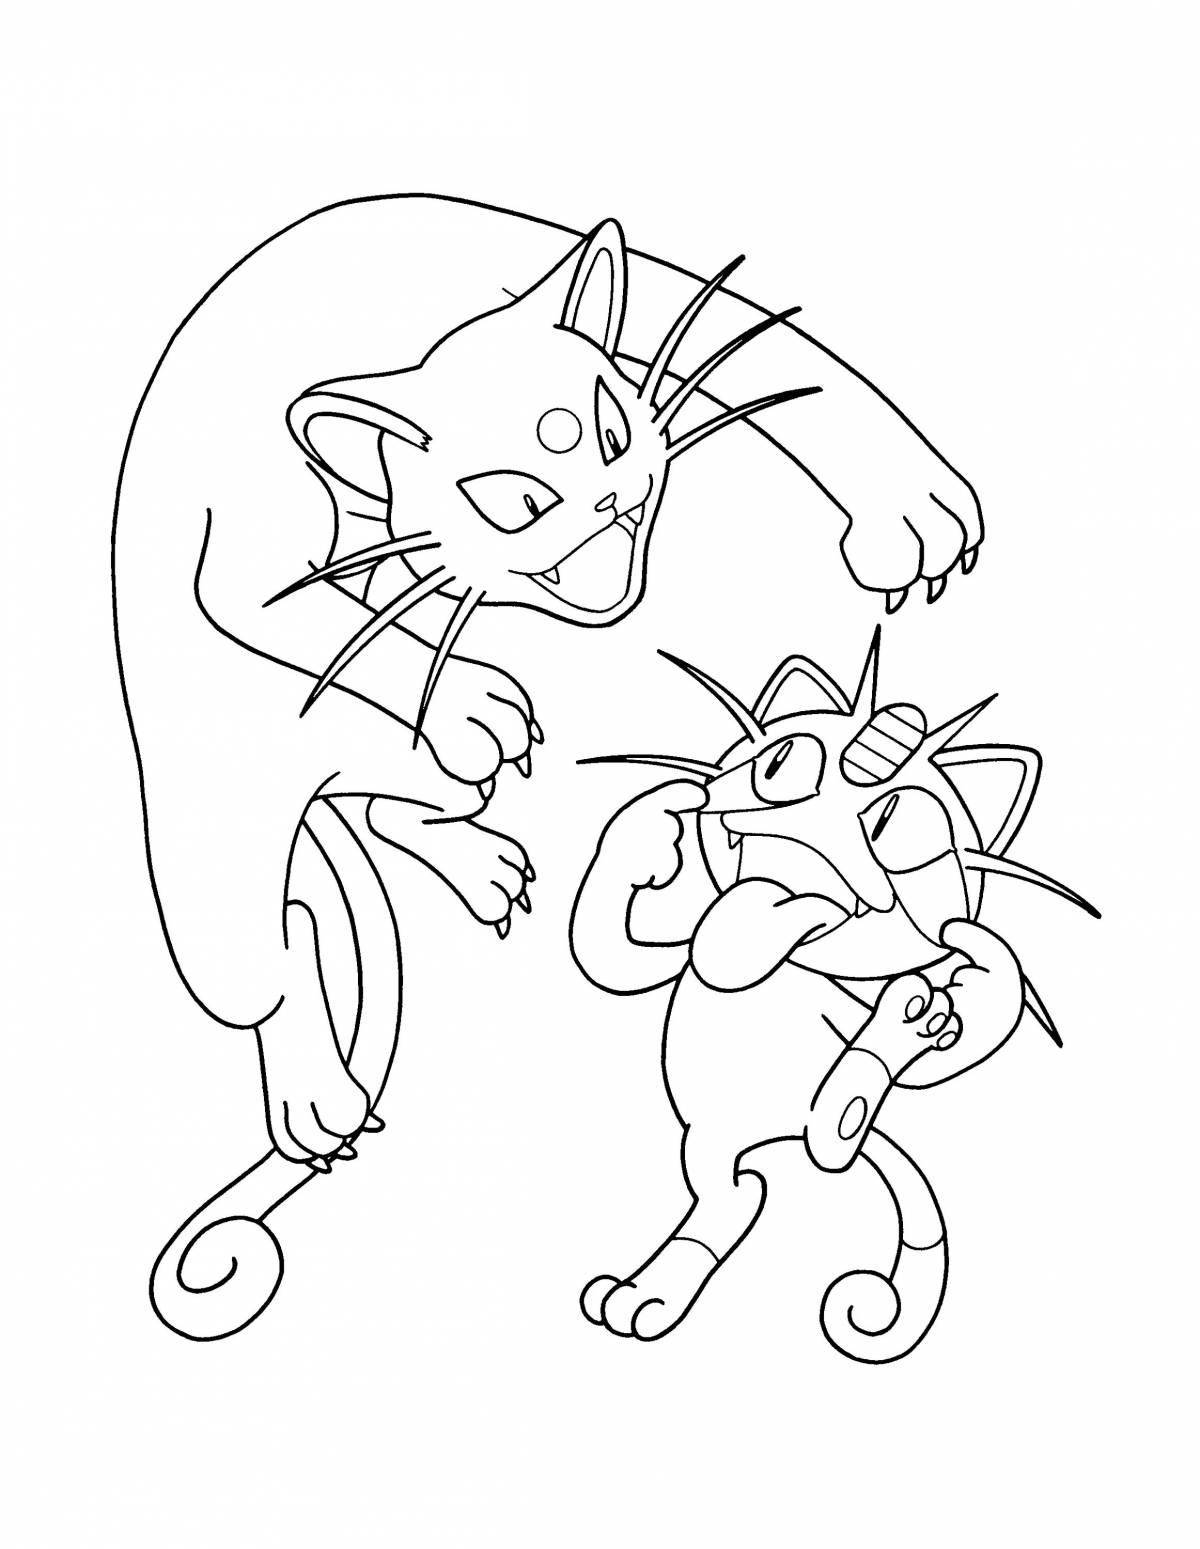 Chooch meow colorful coloring page